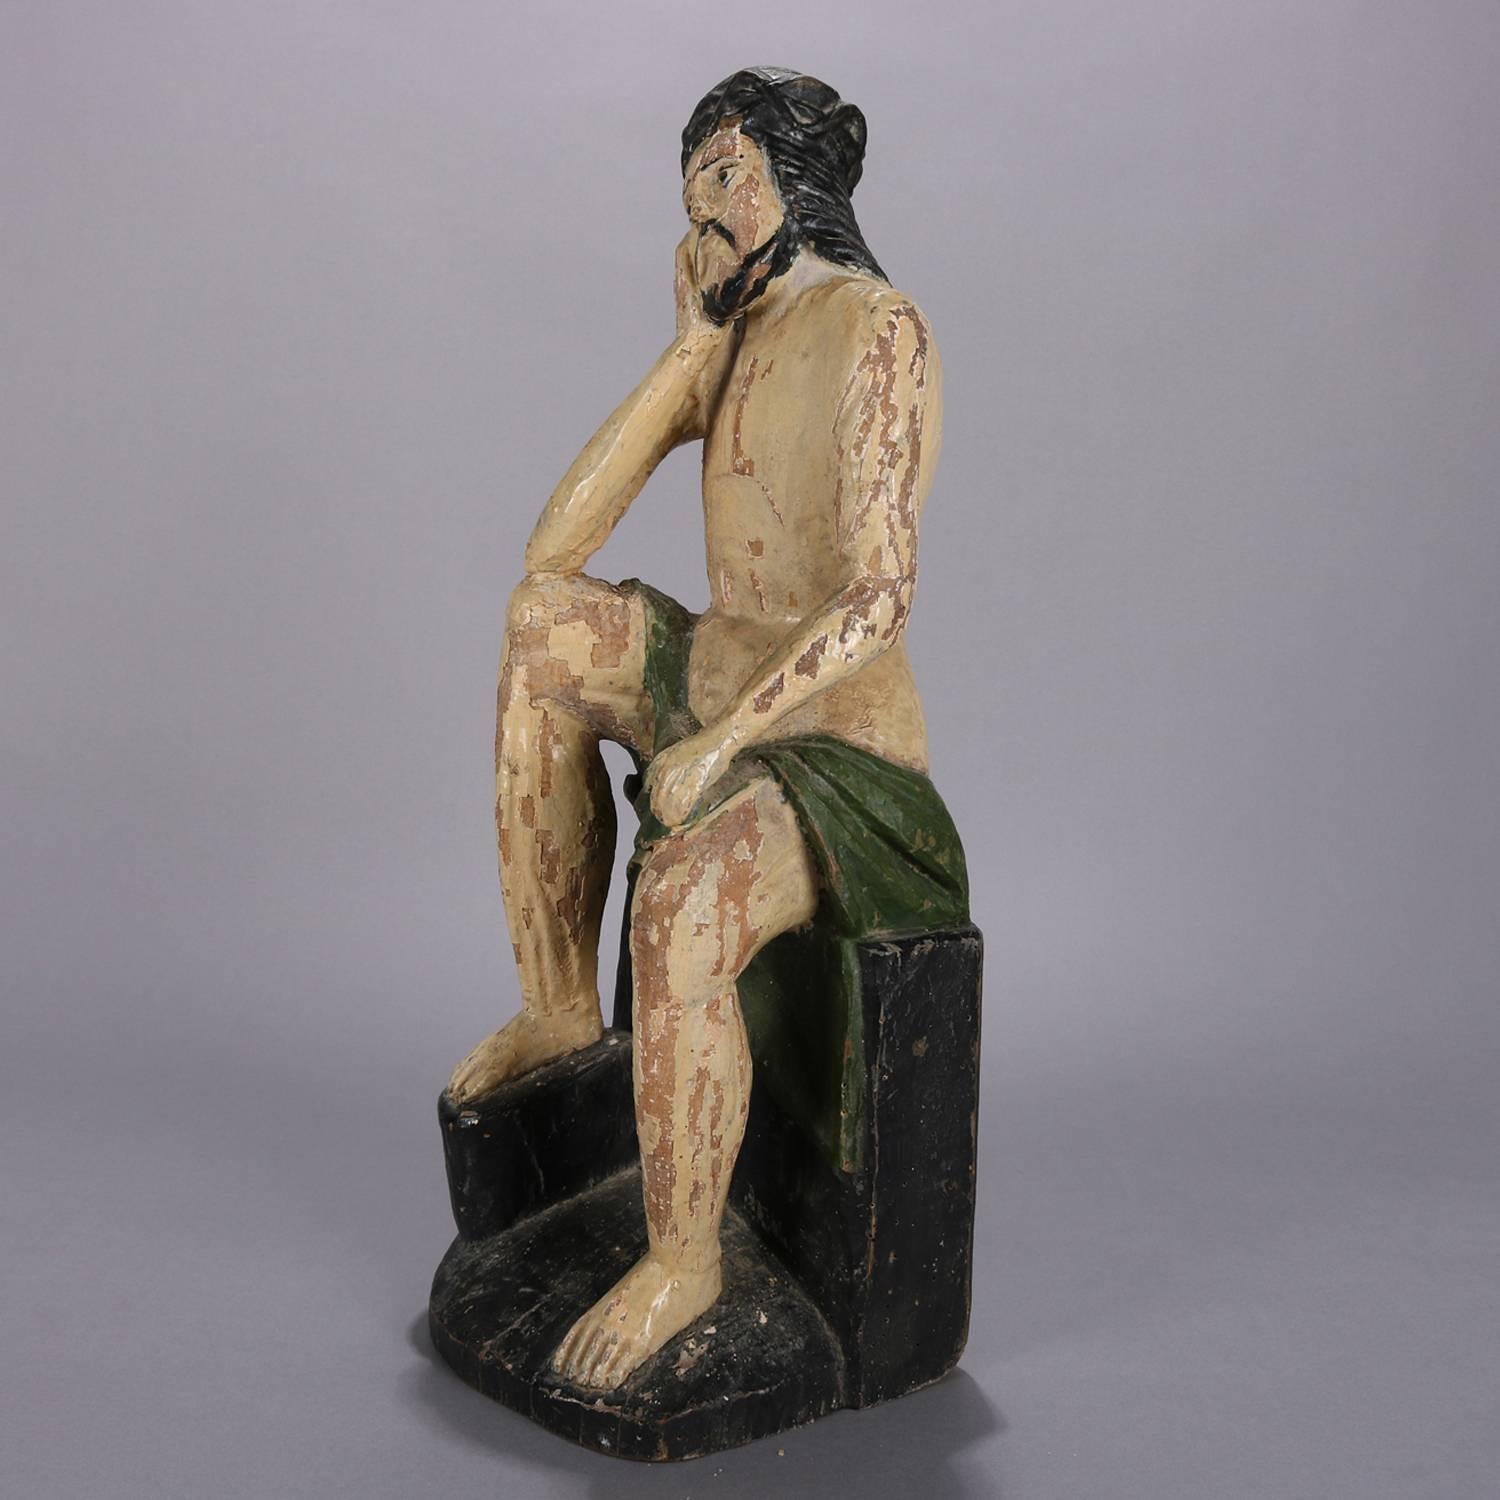 18th century Italian Folk Art portrait Santos religious Icon sculpture features polychromed wood carving of seated and pensive Jesus Christ.

Measures: 19.75